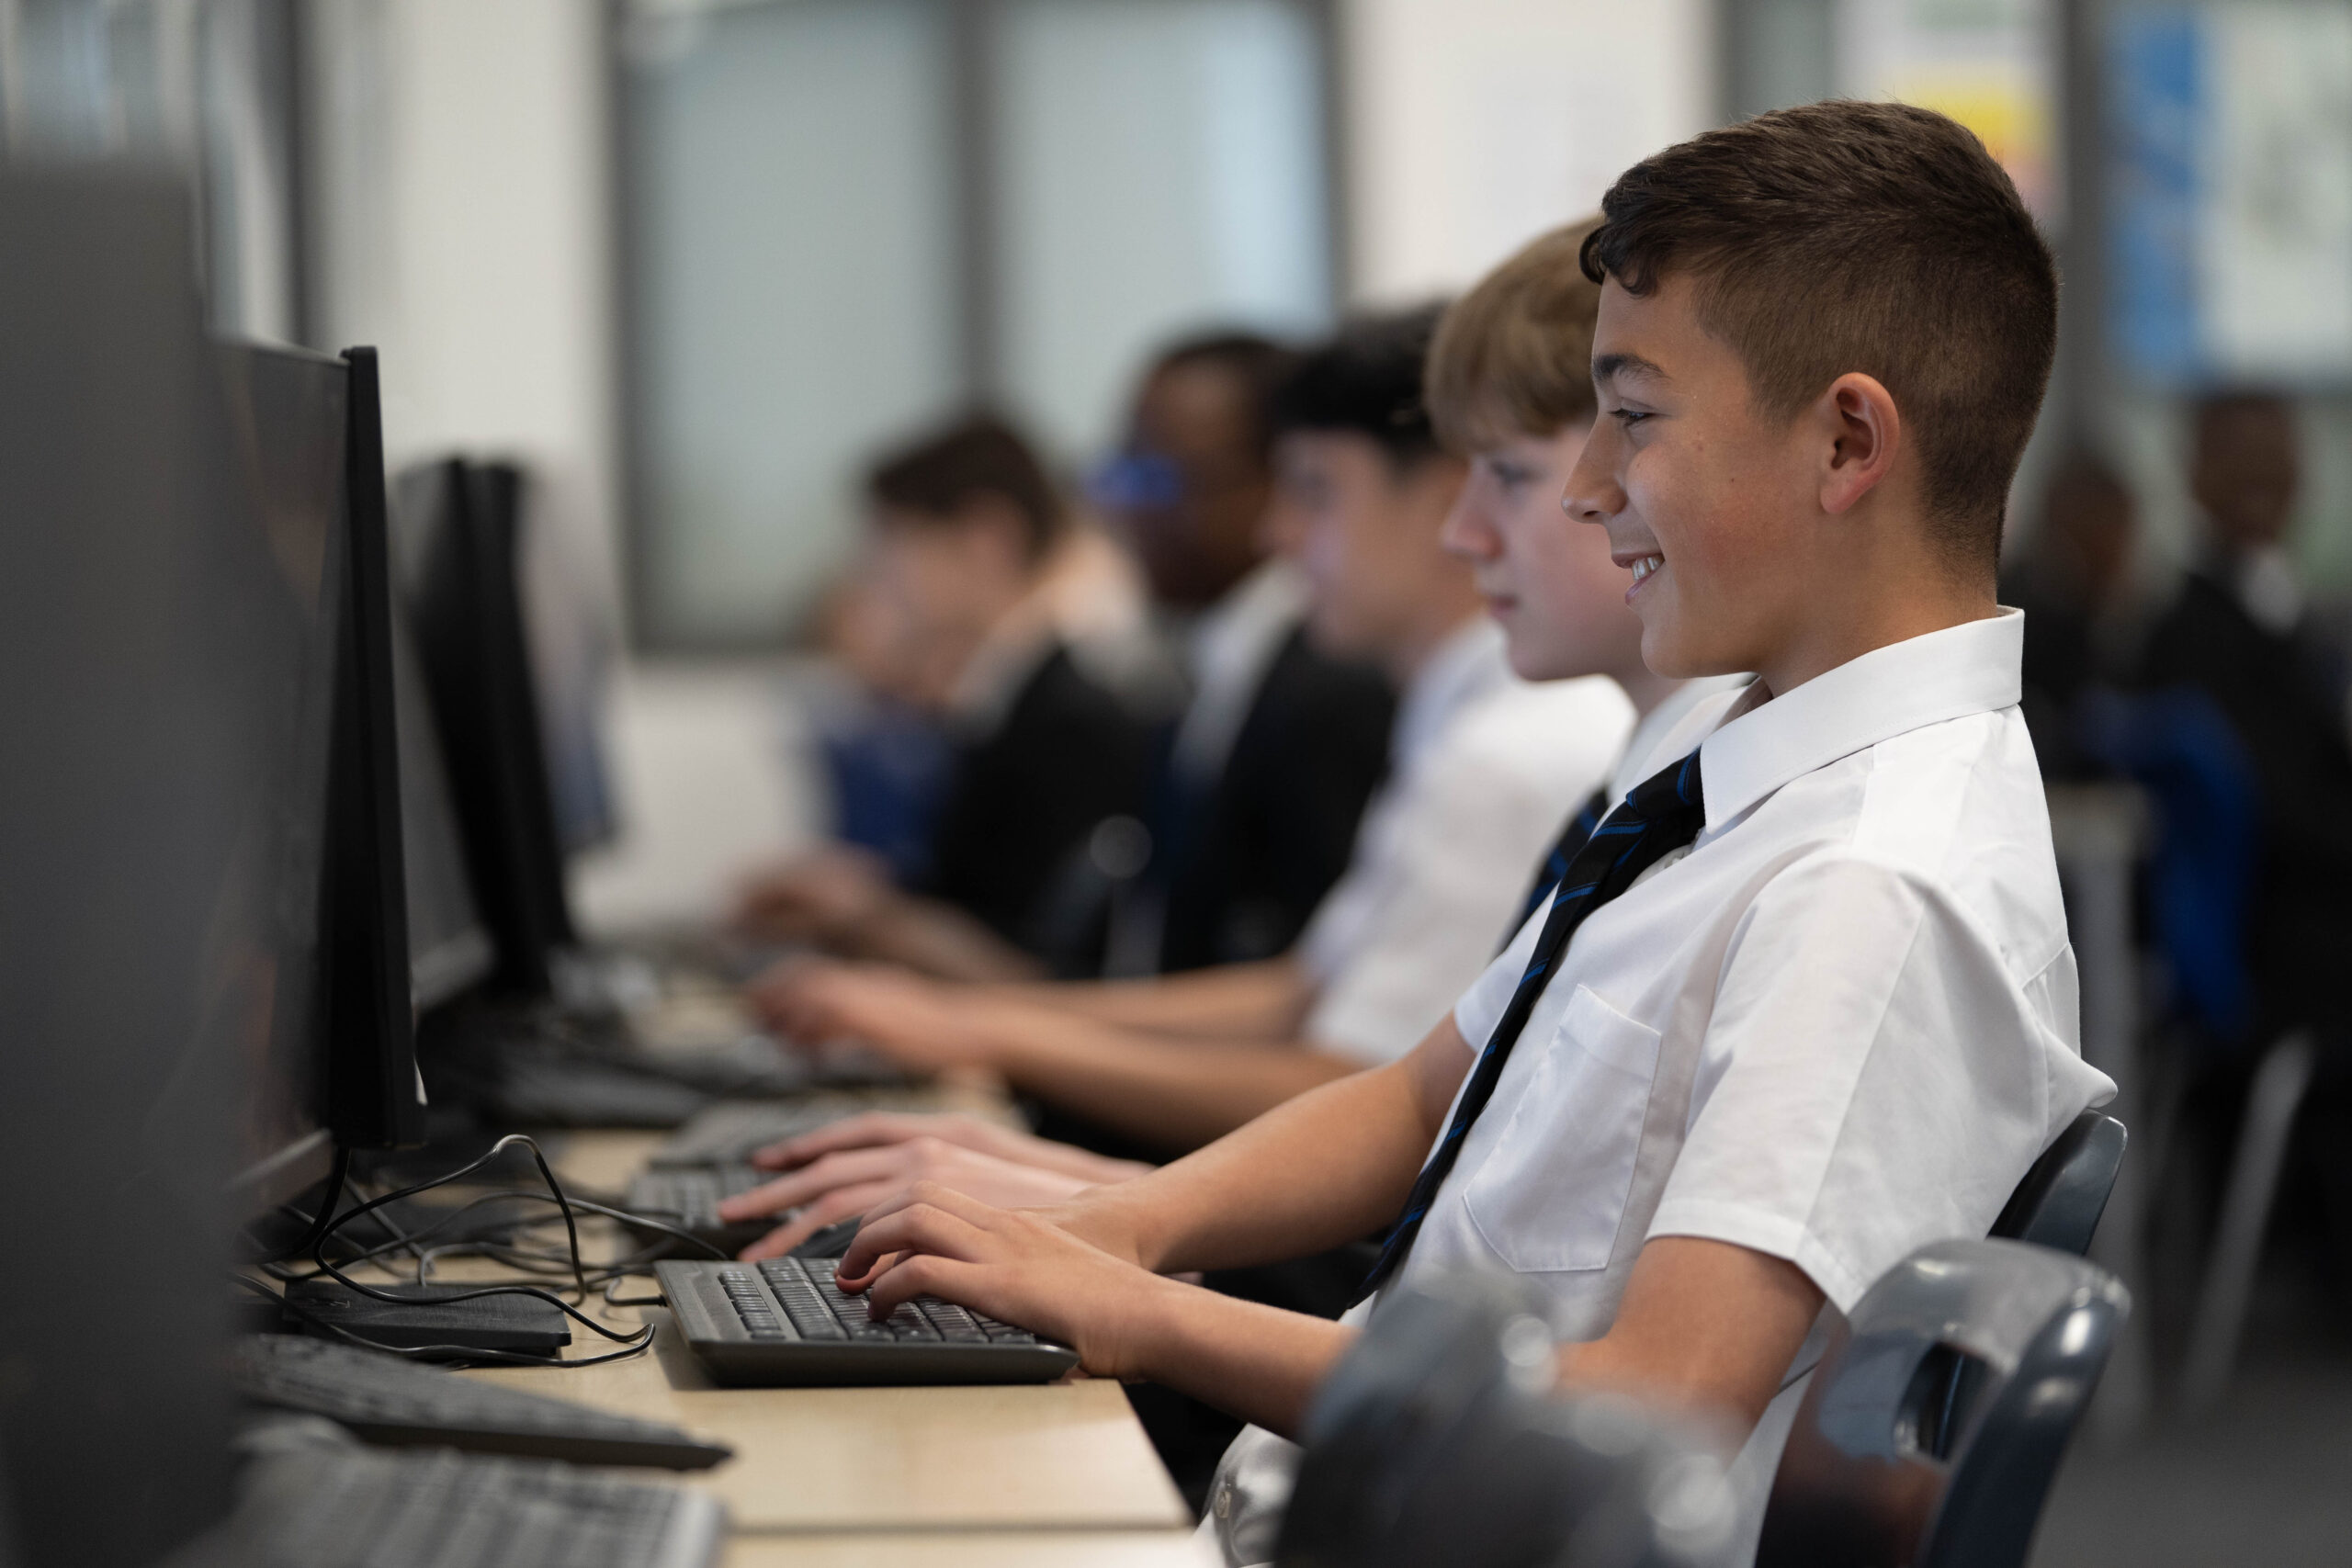 A row of students on computers